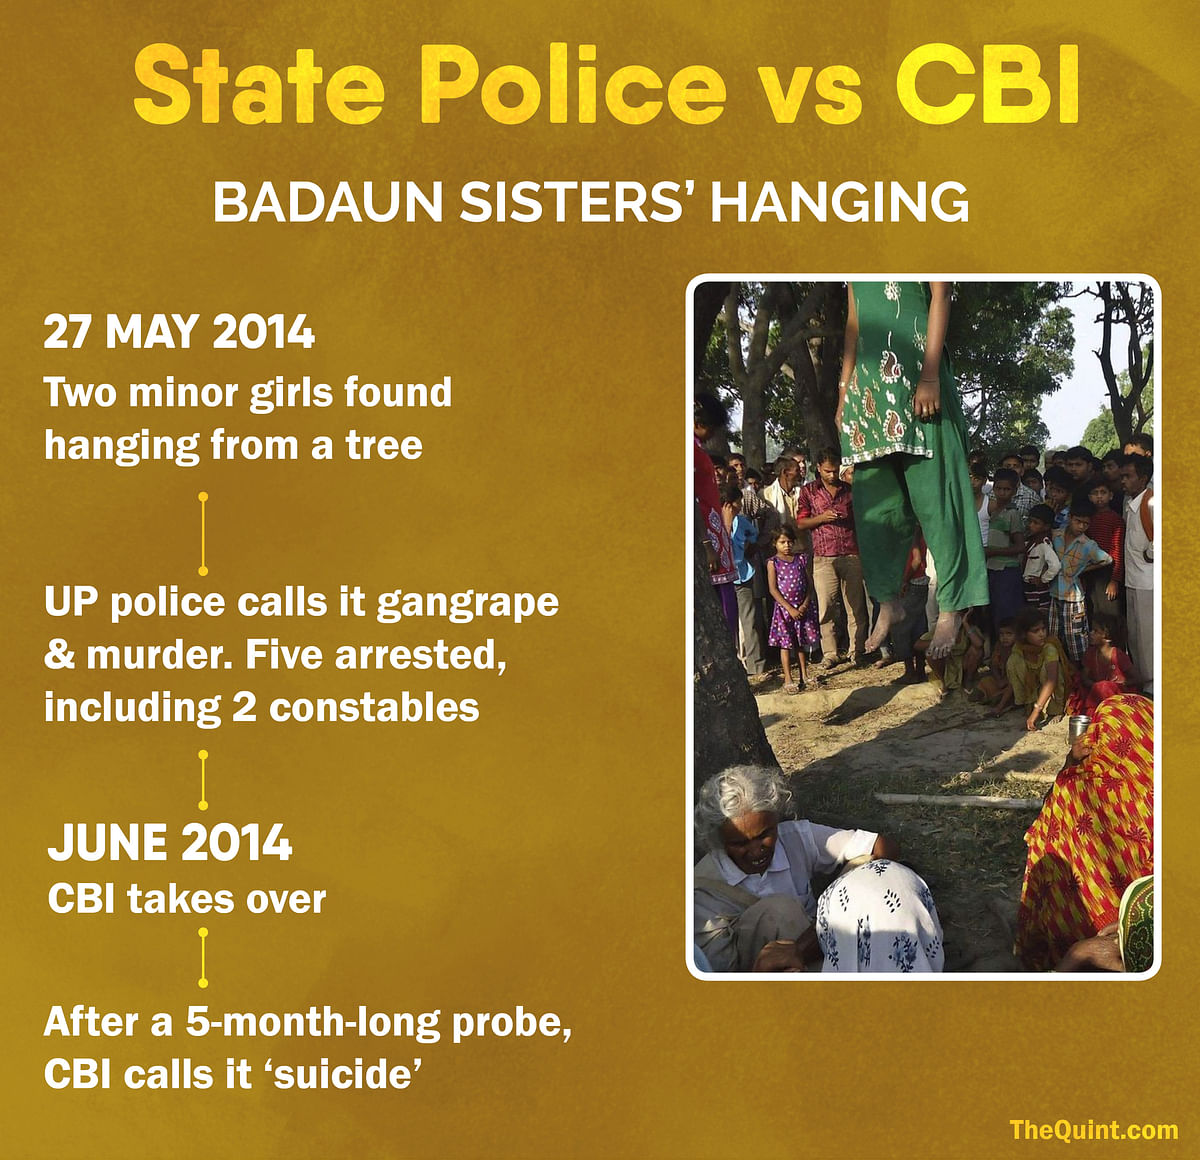 In several other cases, the CBI investigation has completely upended the conclusions of the state police probe.